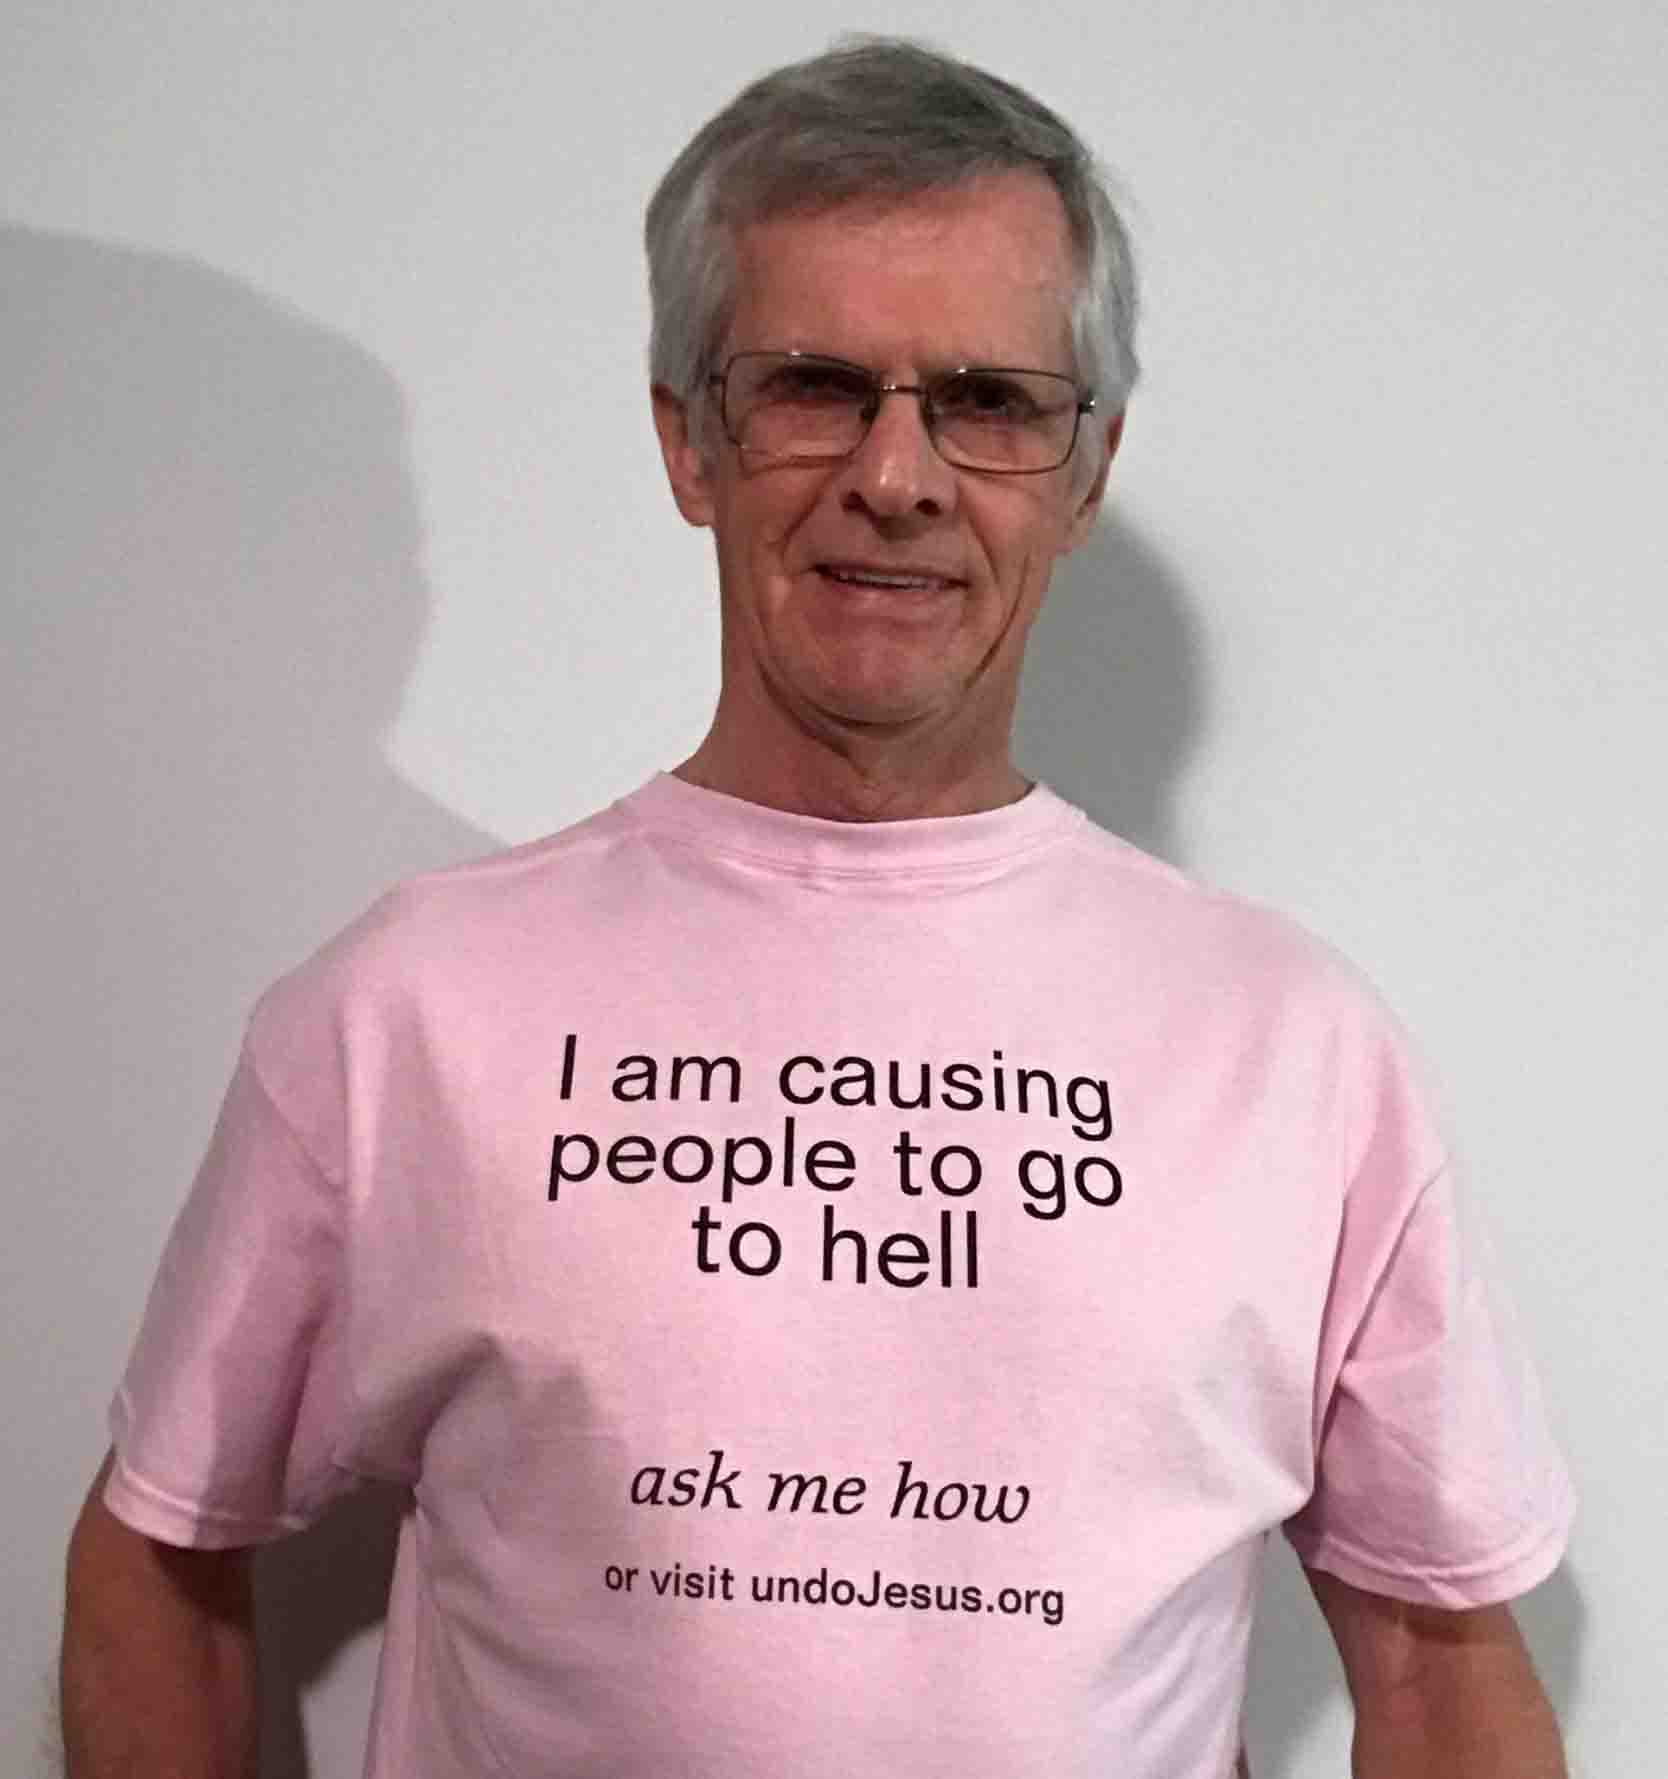 Darwin Bedford wearing his shirt that says 'I am causing people to go to hell, ask me how'